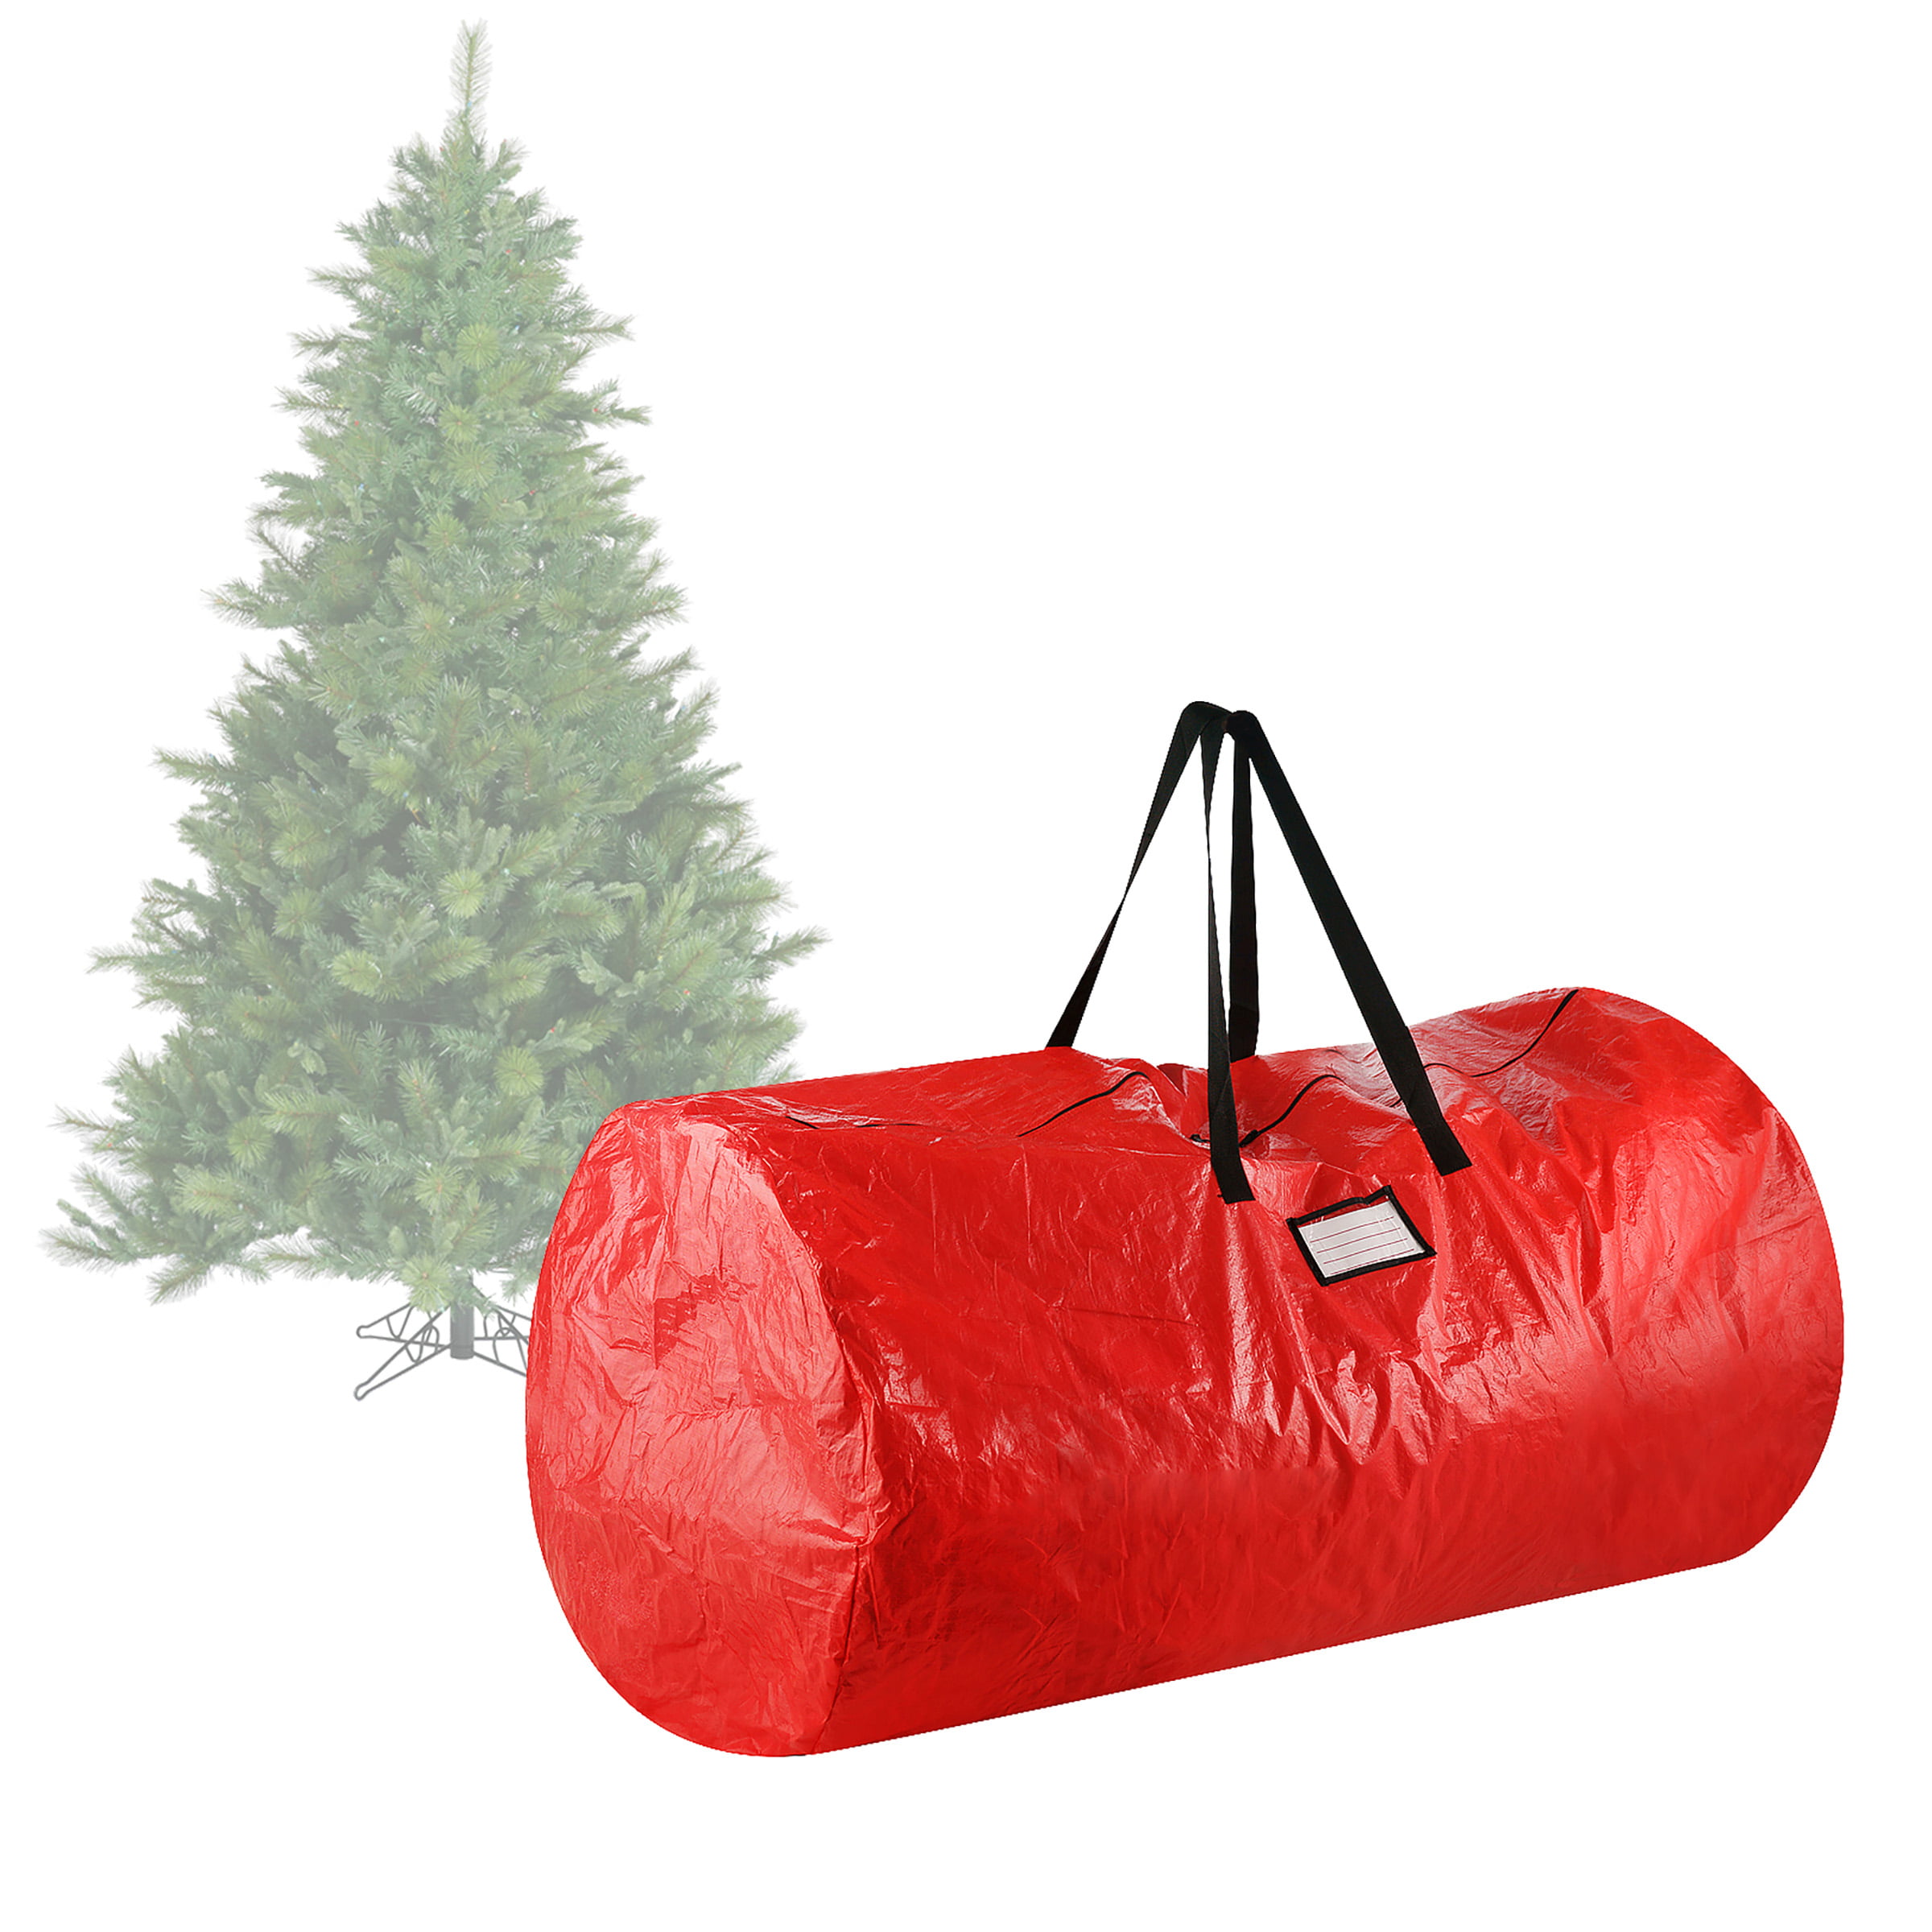 Elf Stor Red Premium Christmas Tree Bag Holiday Large For up to 7.5 Ft Tree 